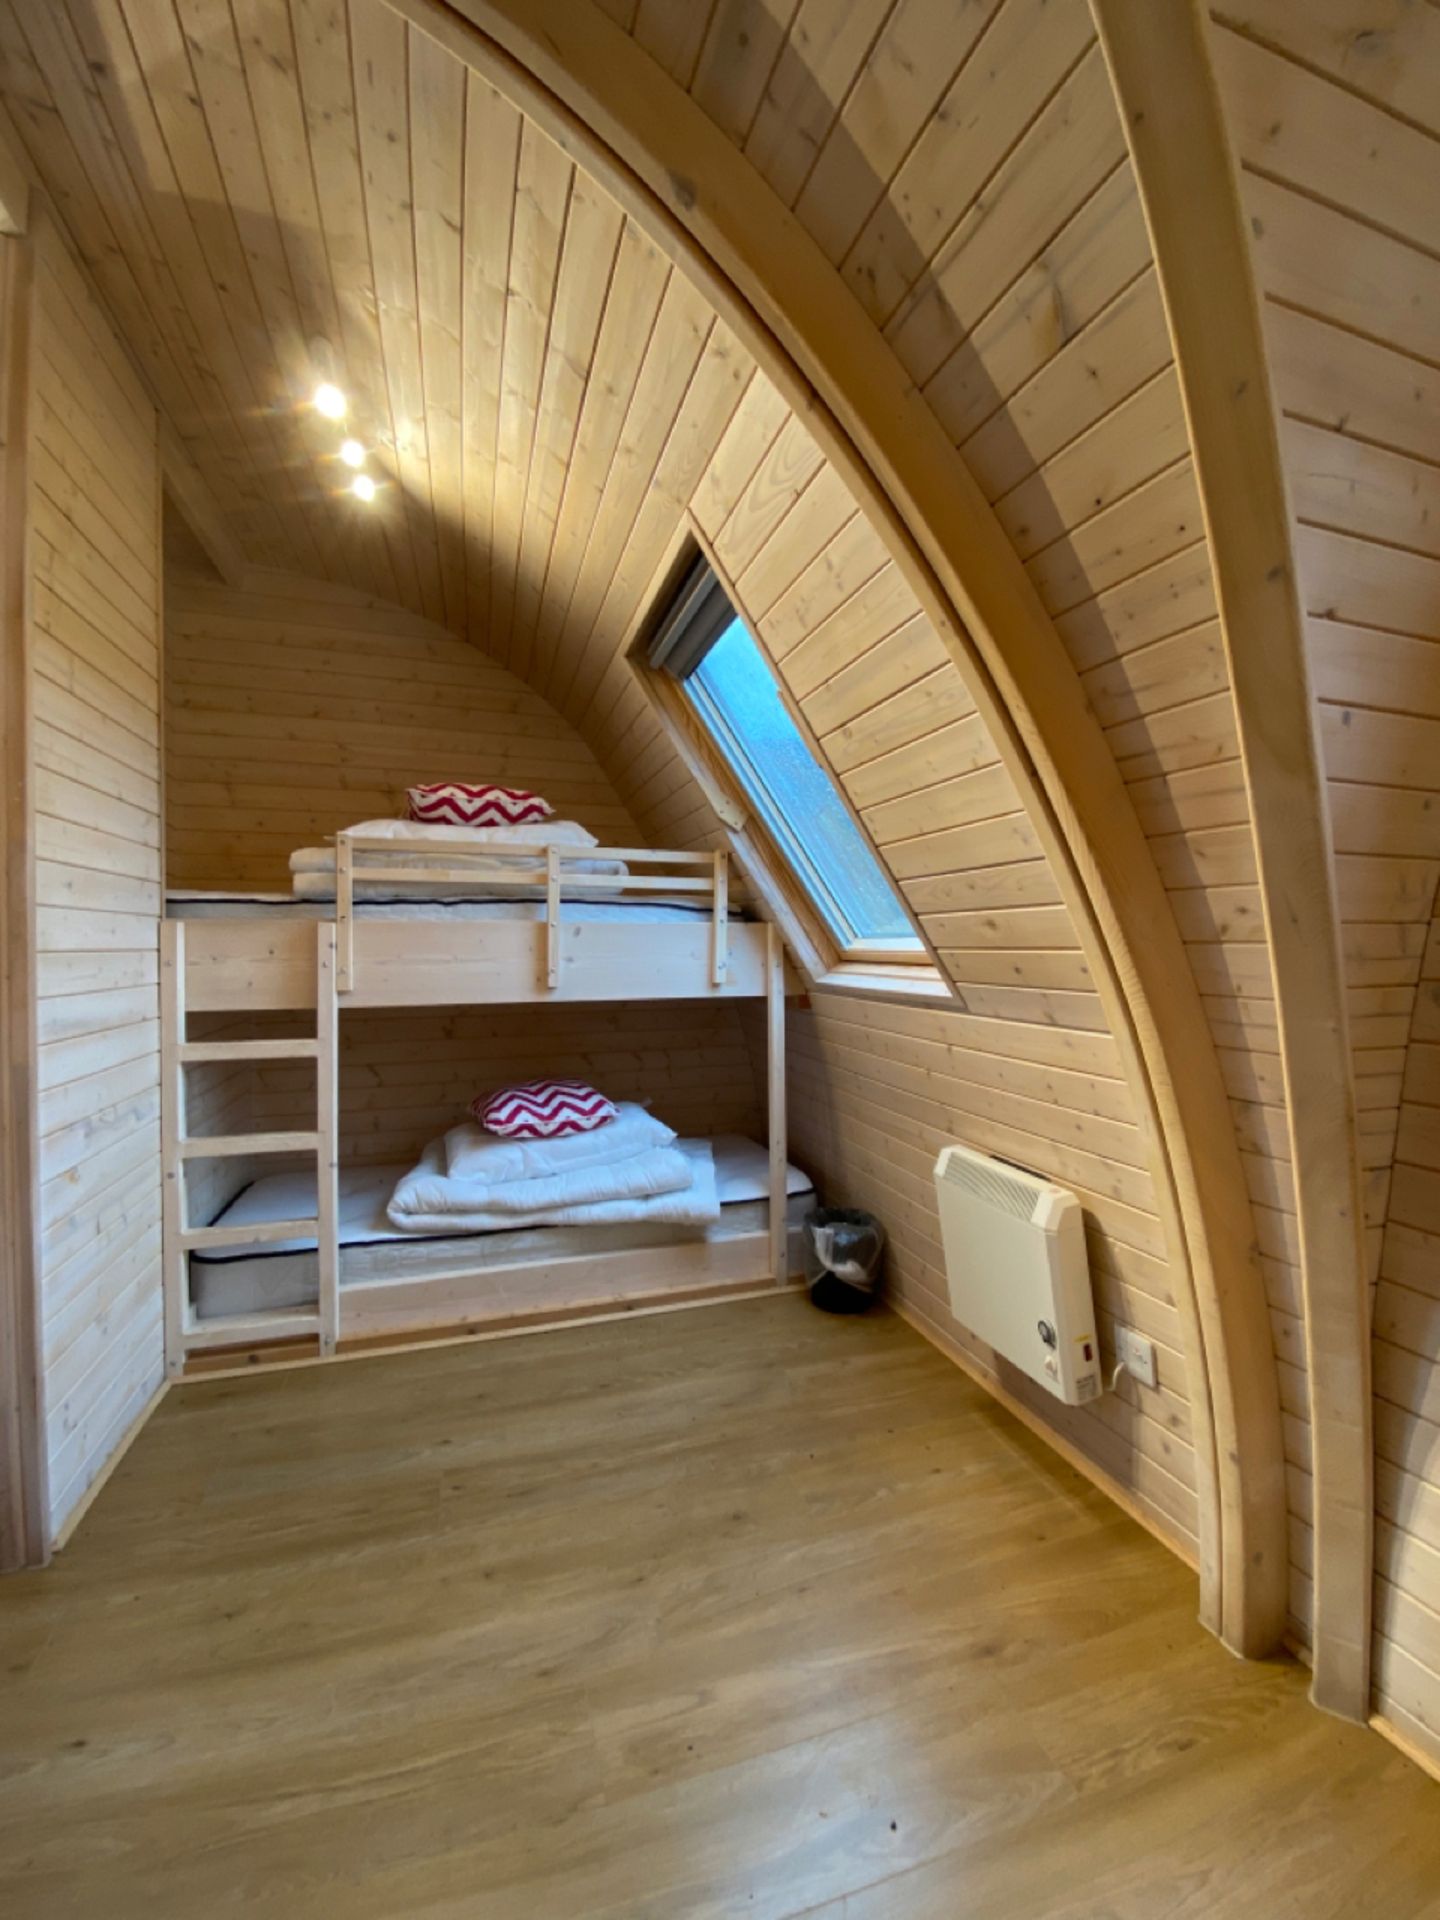 Arch Leisure Europod - Image 10 of 28